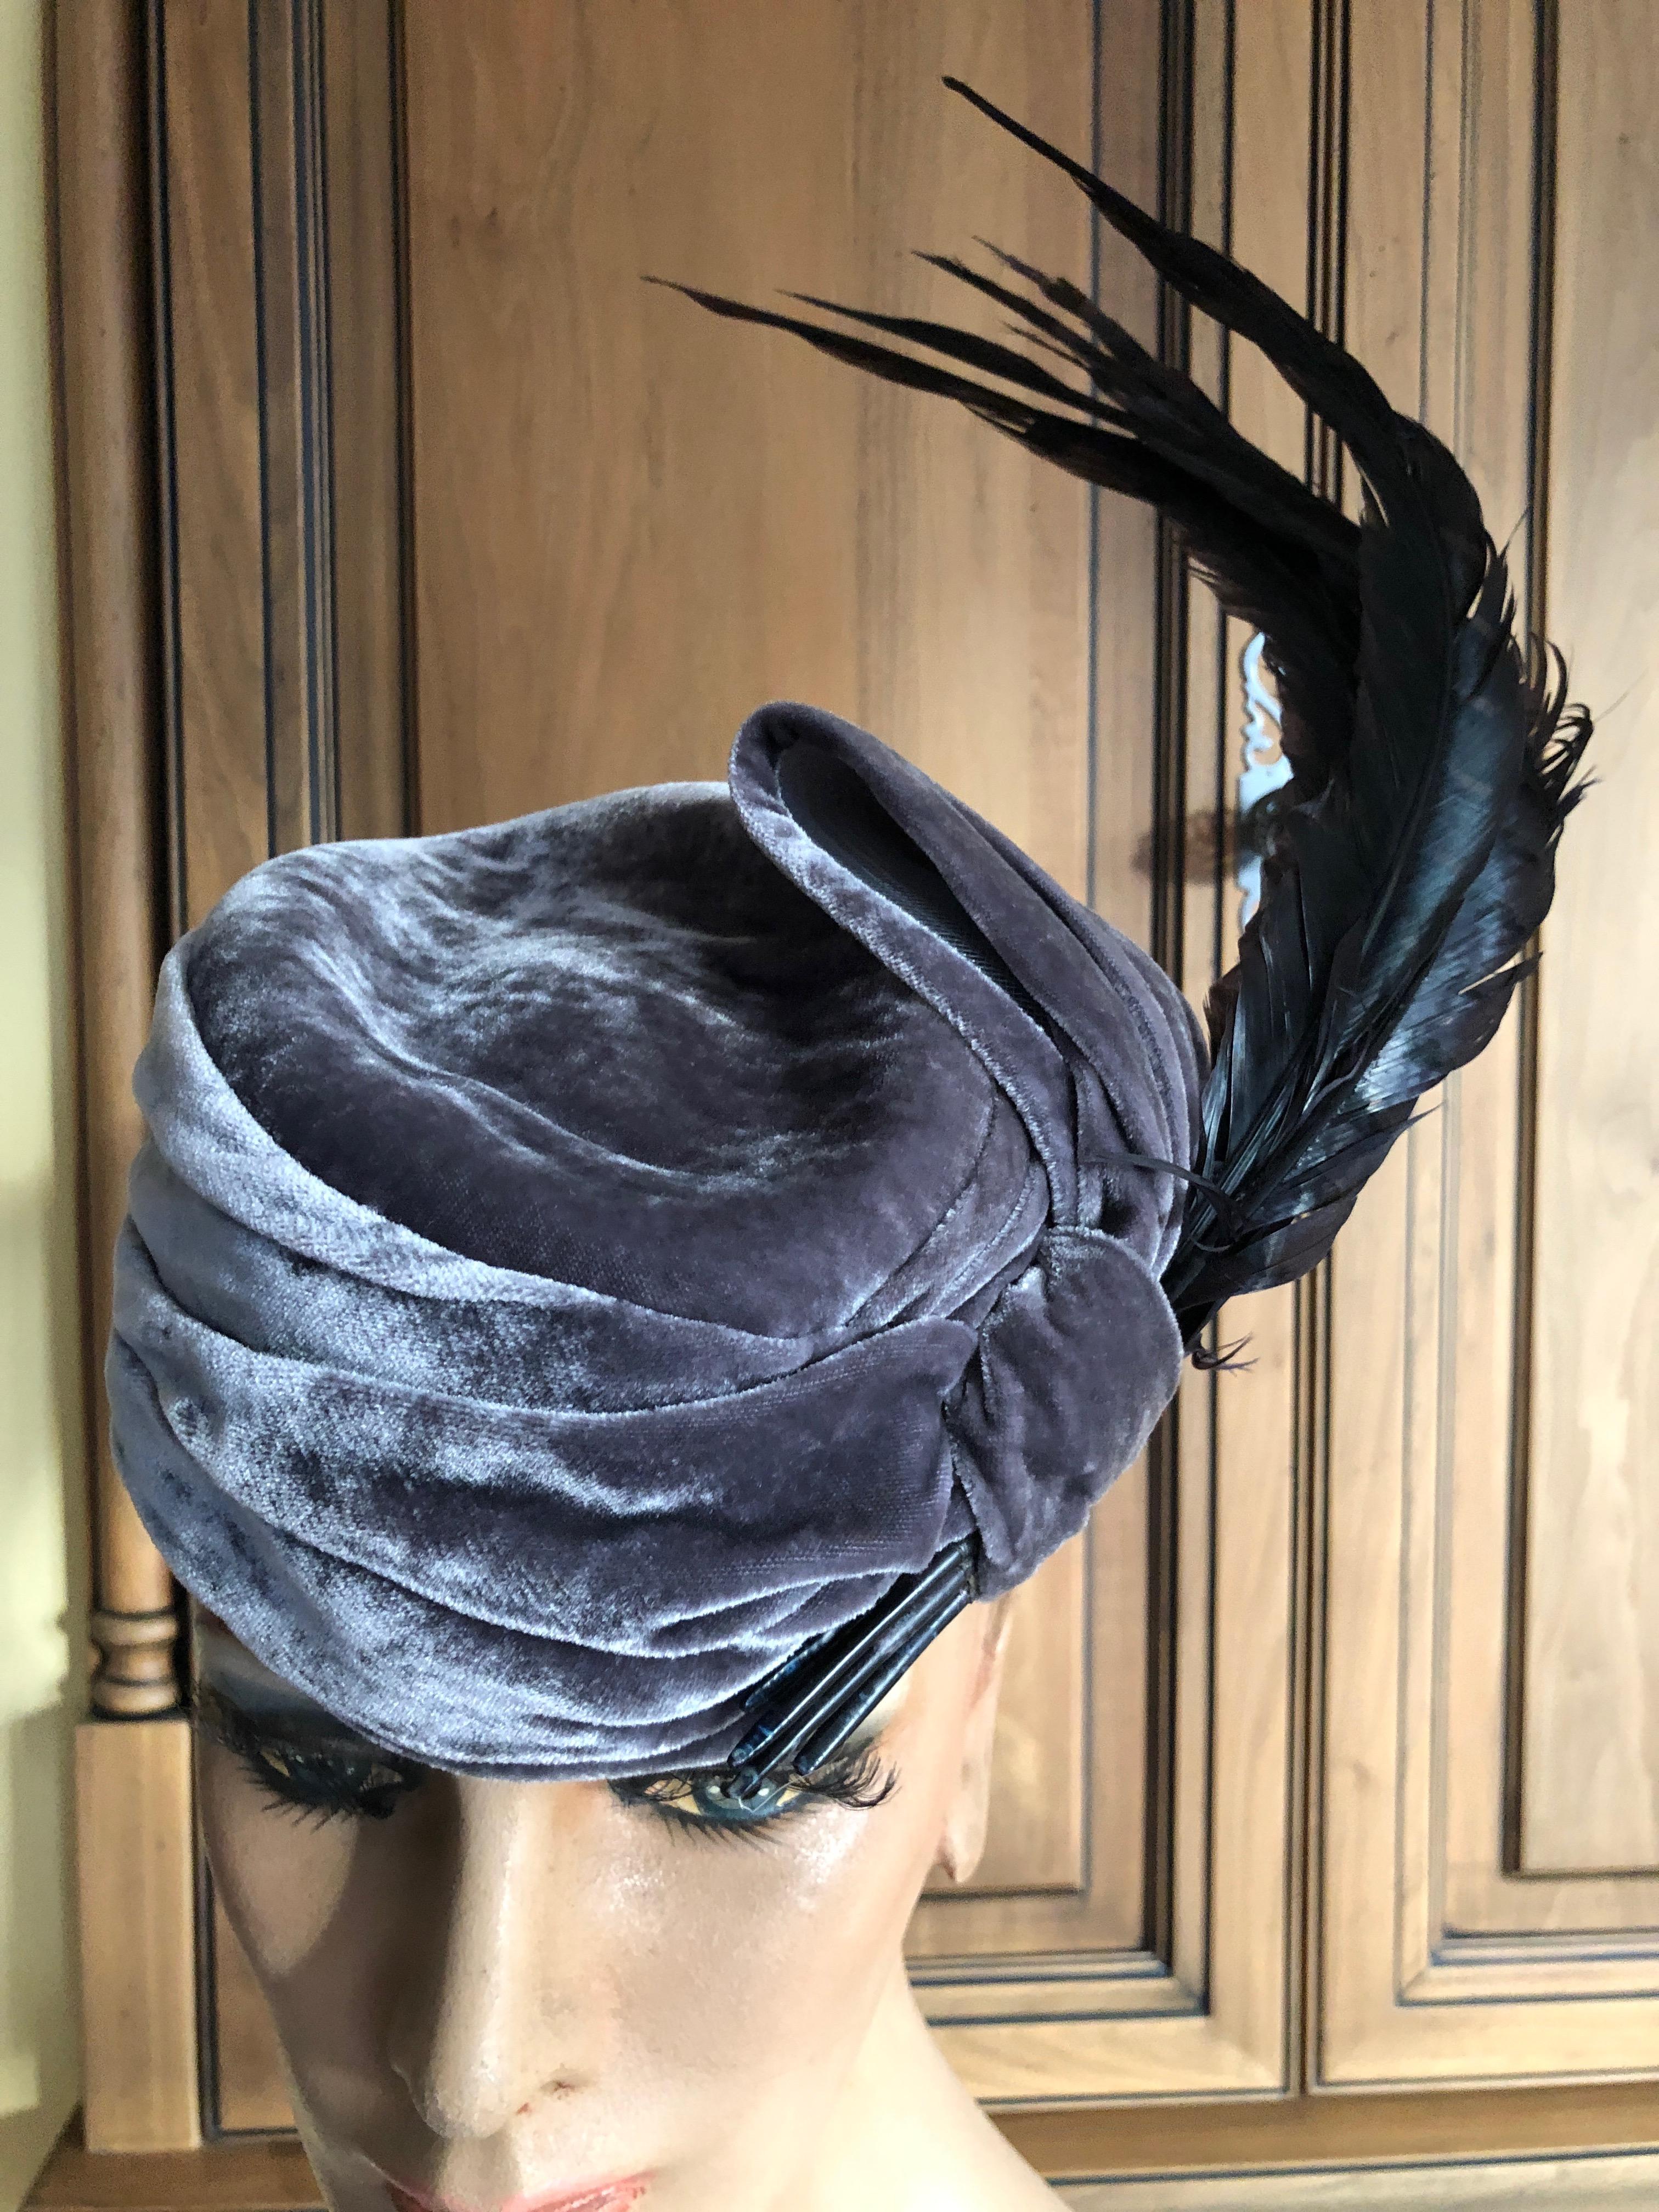 Christian Dior Haute Couture Feathered Hat by Stephen Jones for John Galliano.
So beautiful, dove gray velvet with huge swooping feathers.
Tag reads 57
In excellent condition